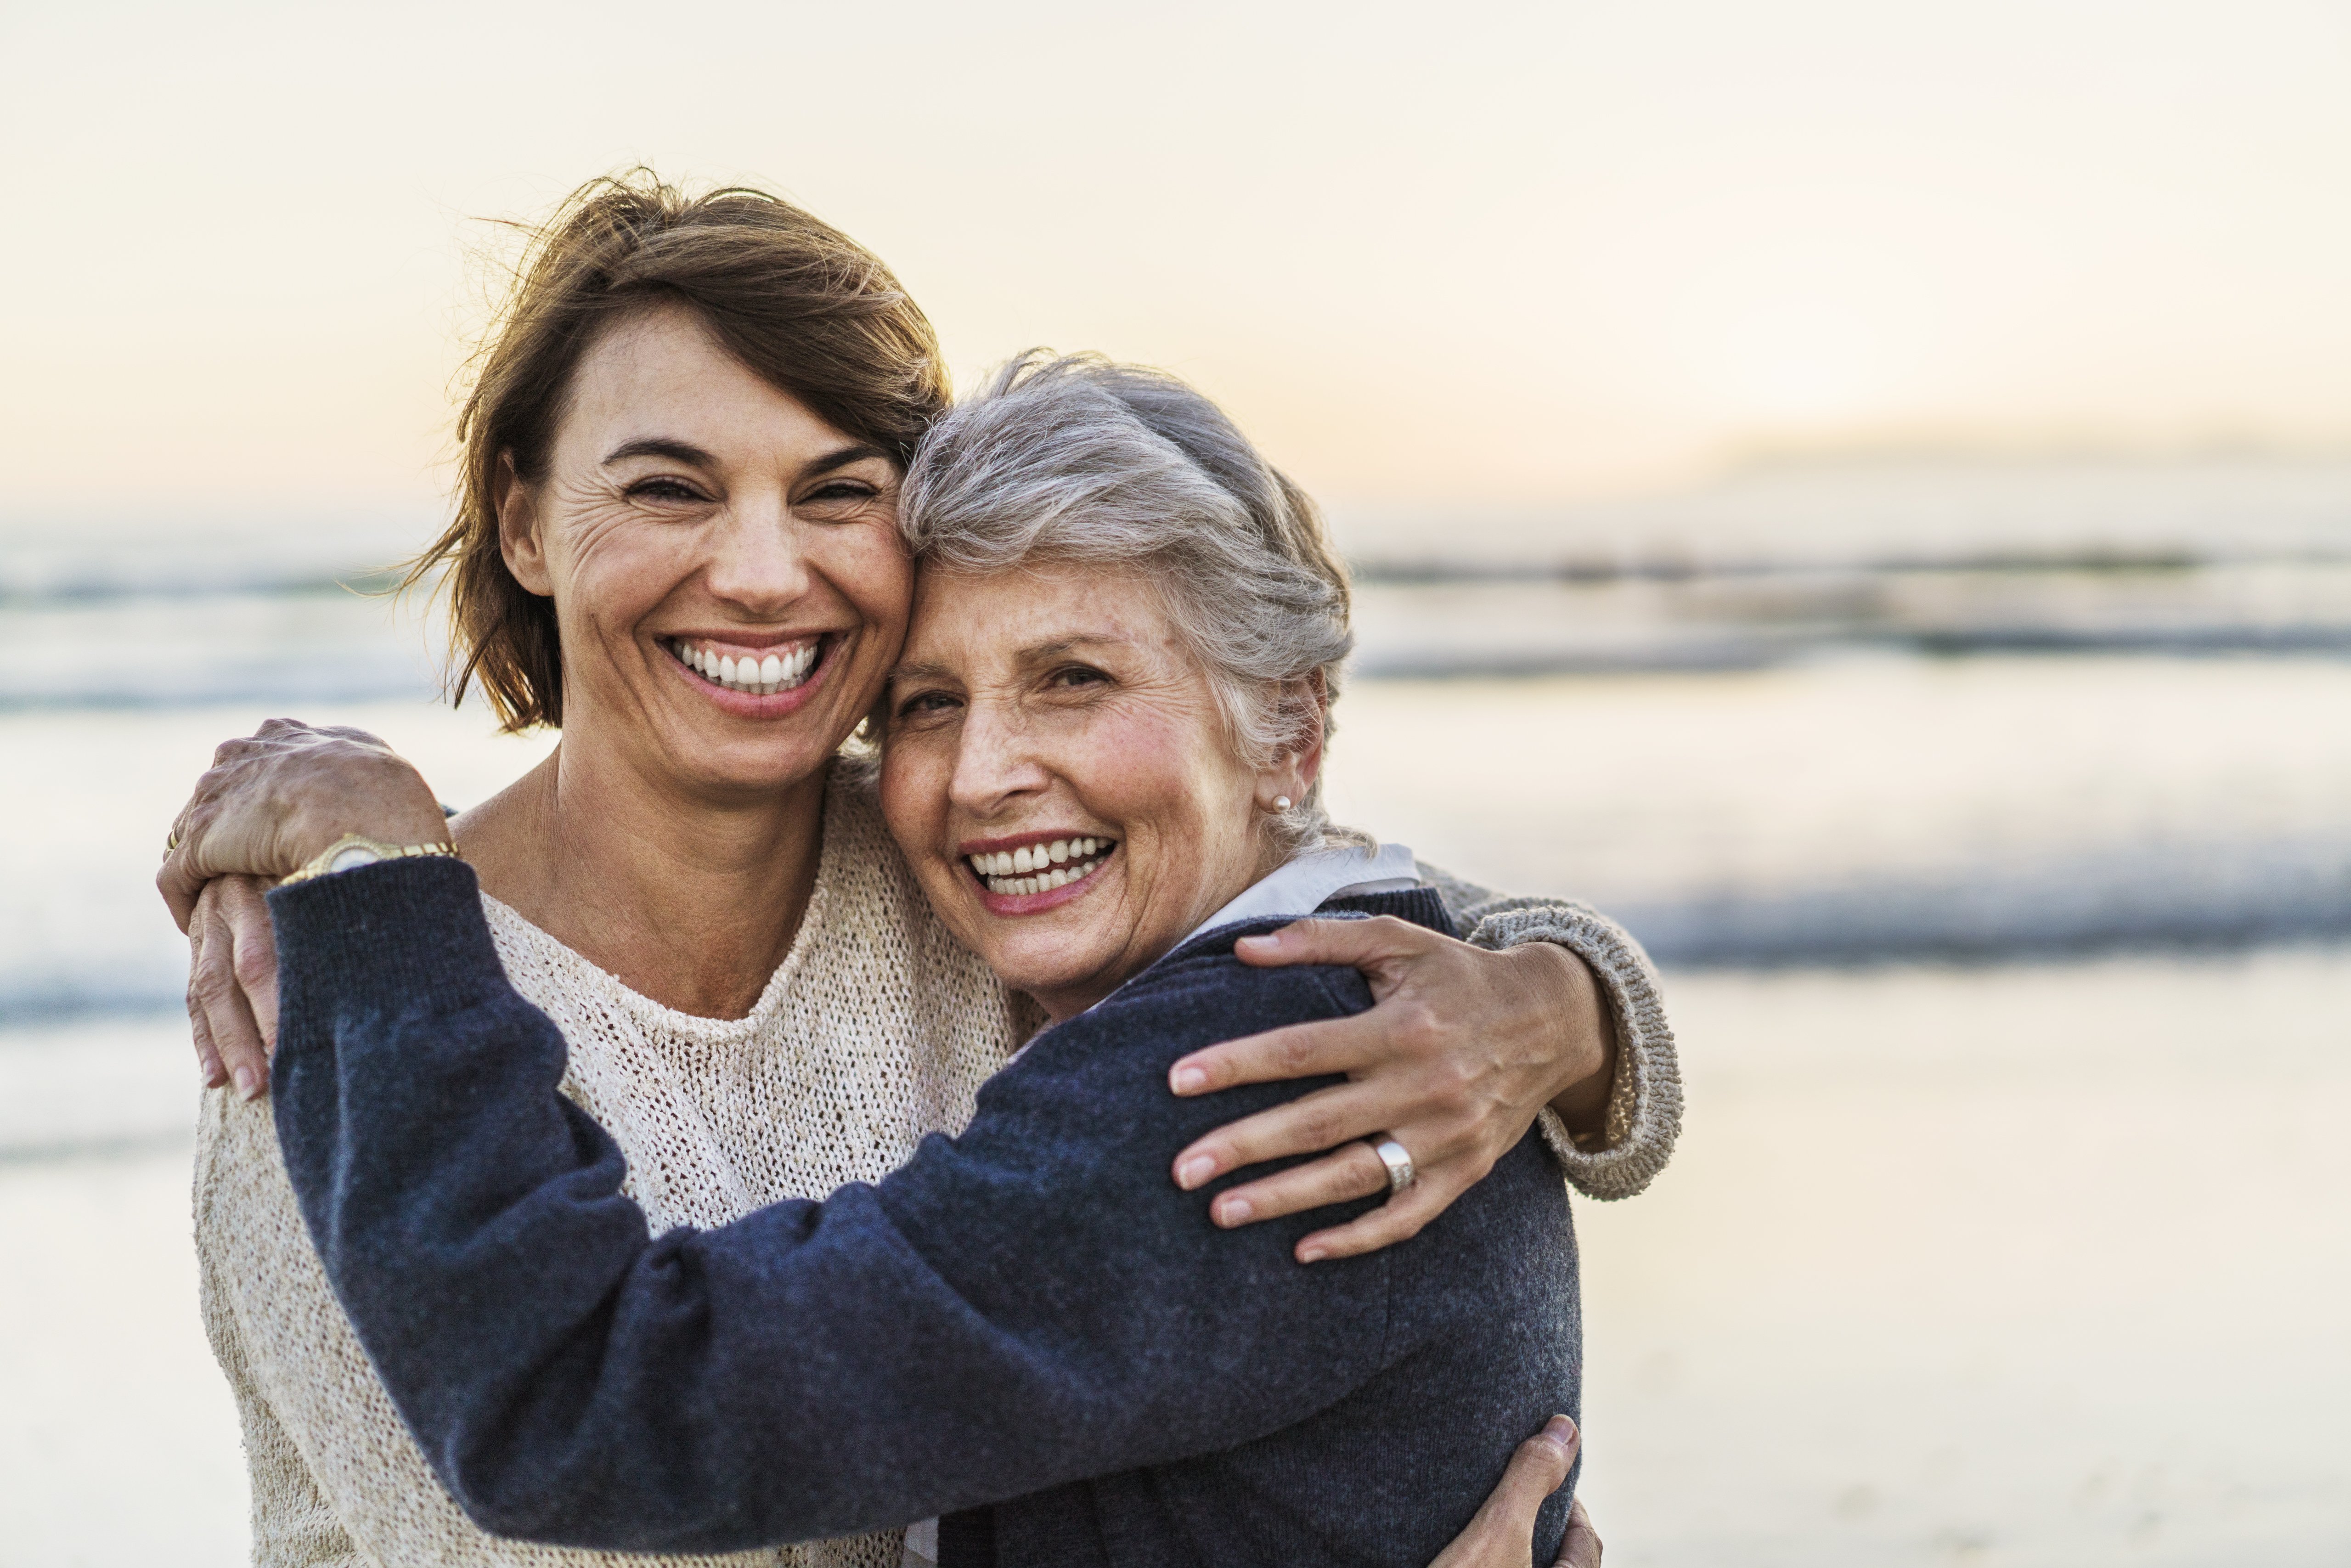 A photo of happy mother embracing female. Portrait of daughter with senior woman. They are at beach.|Photo: Getty Images